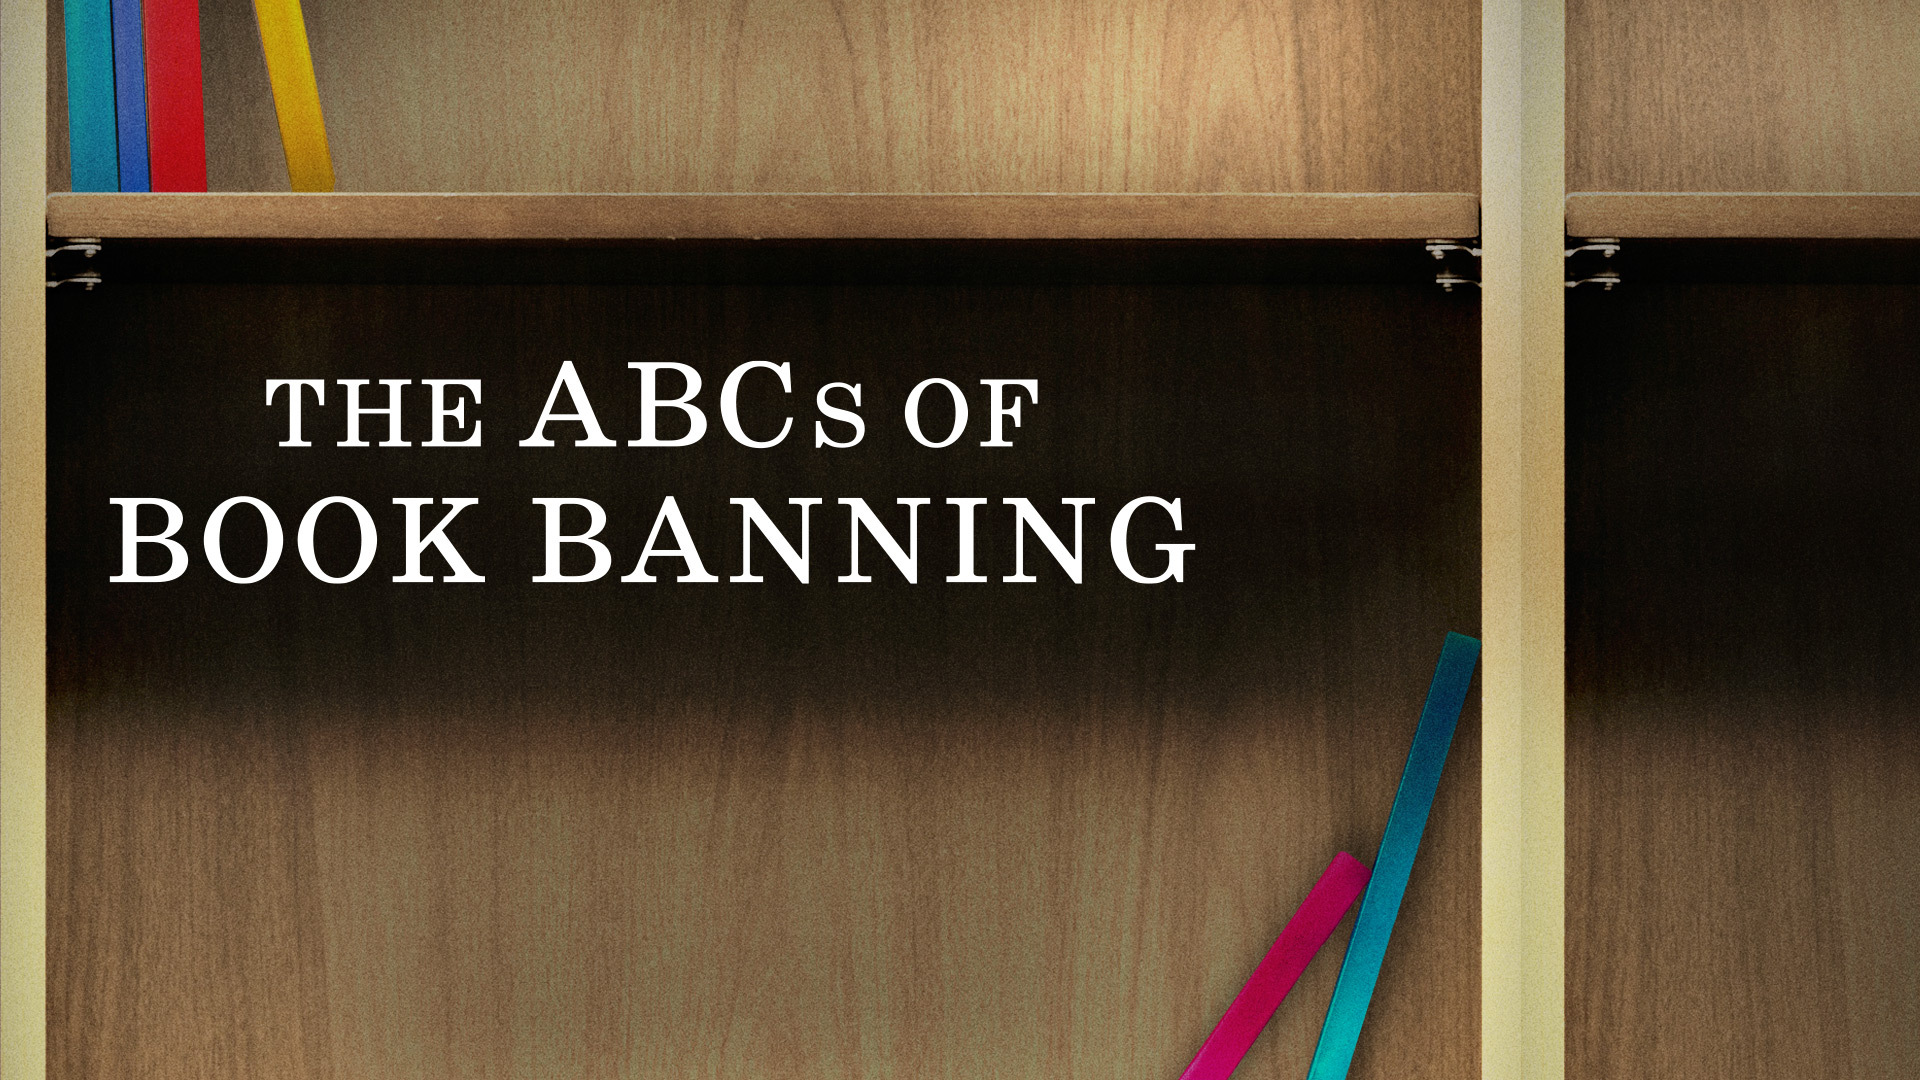 Congratulations to RPJ Client Trish Adlesic on the Nomination of “The ABCs of Book Banning” in the Oscars’ Documentary Short Category